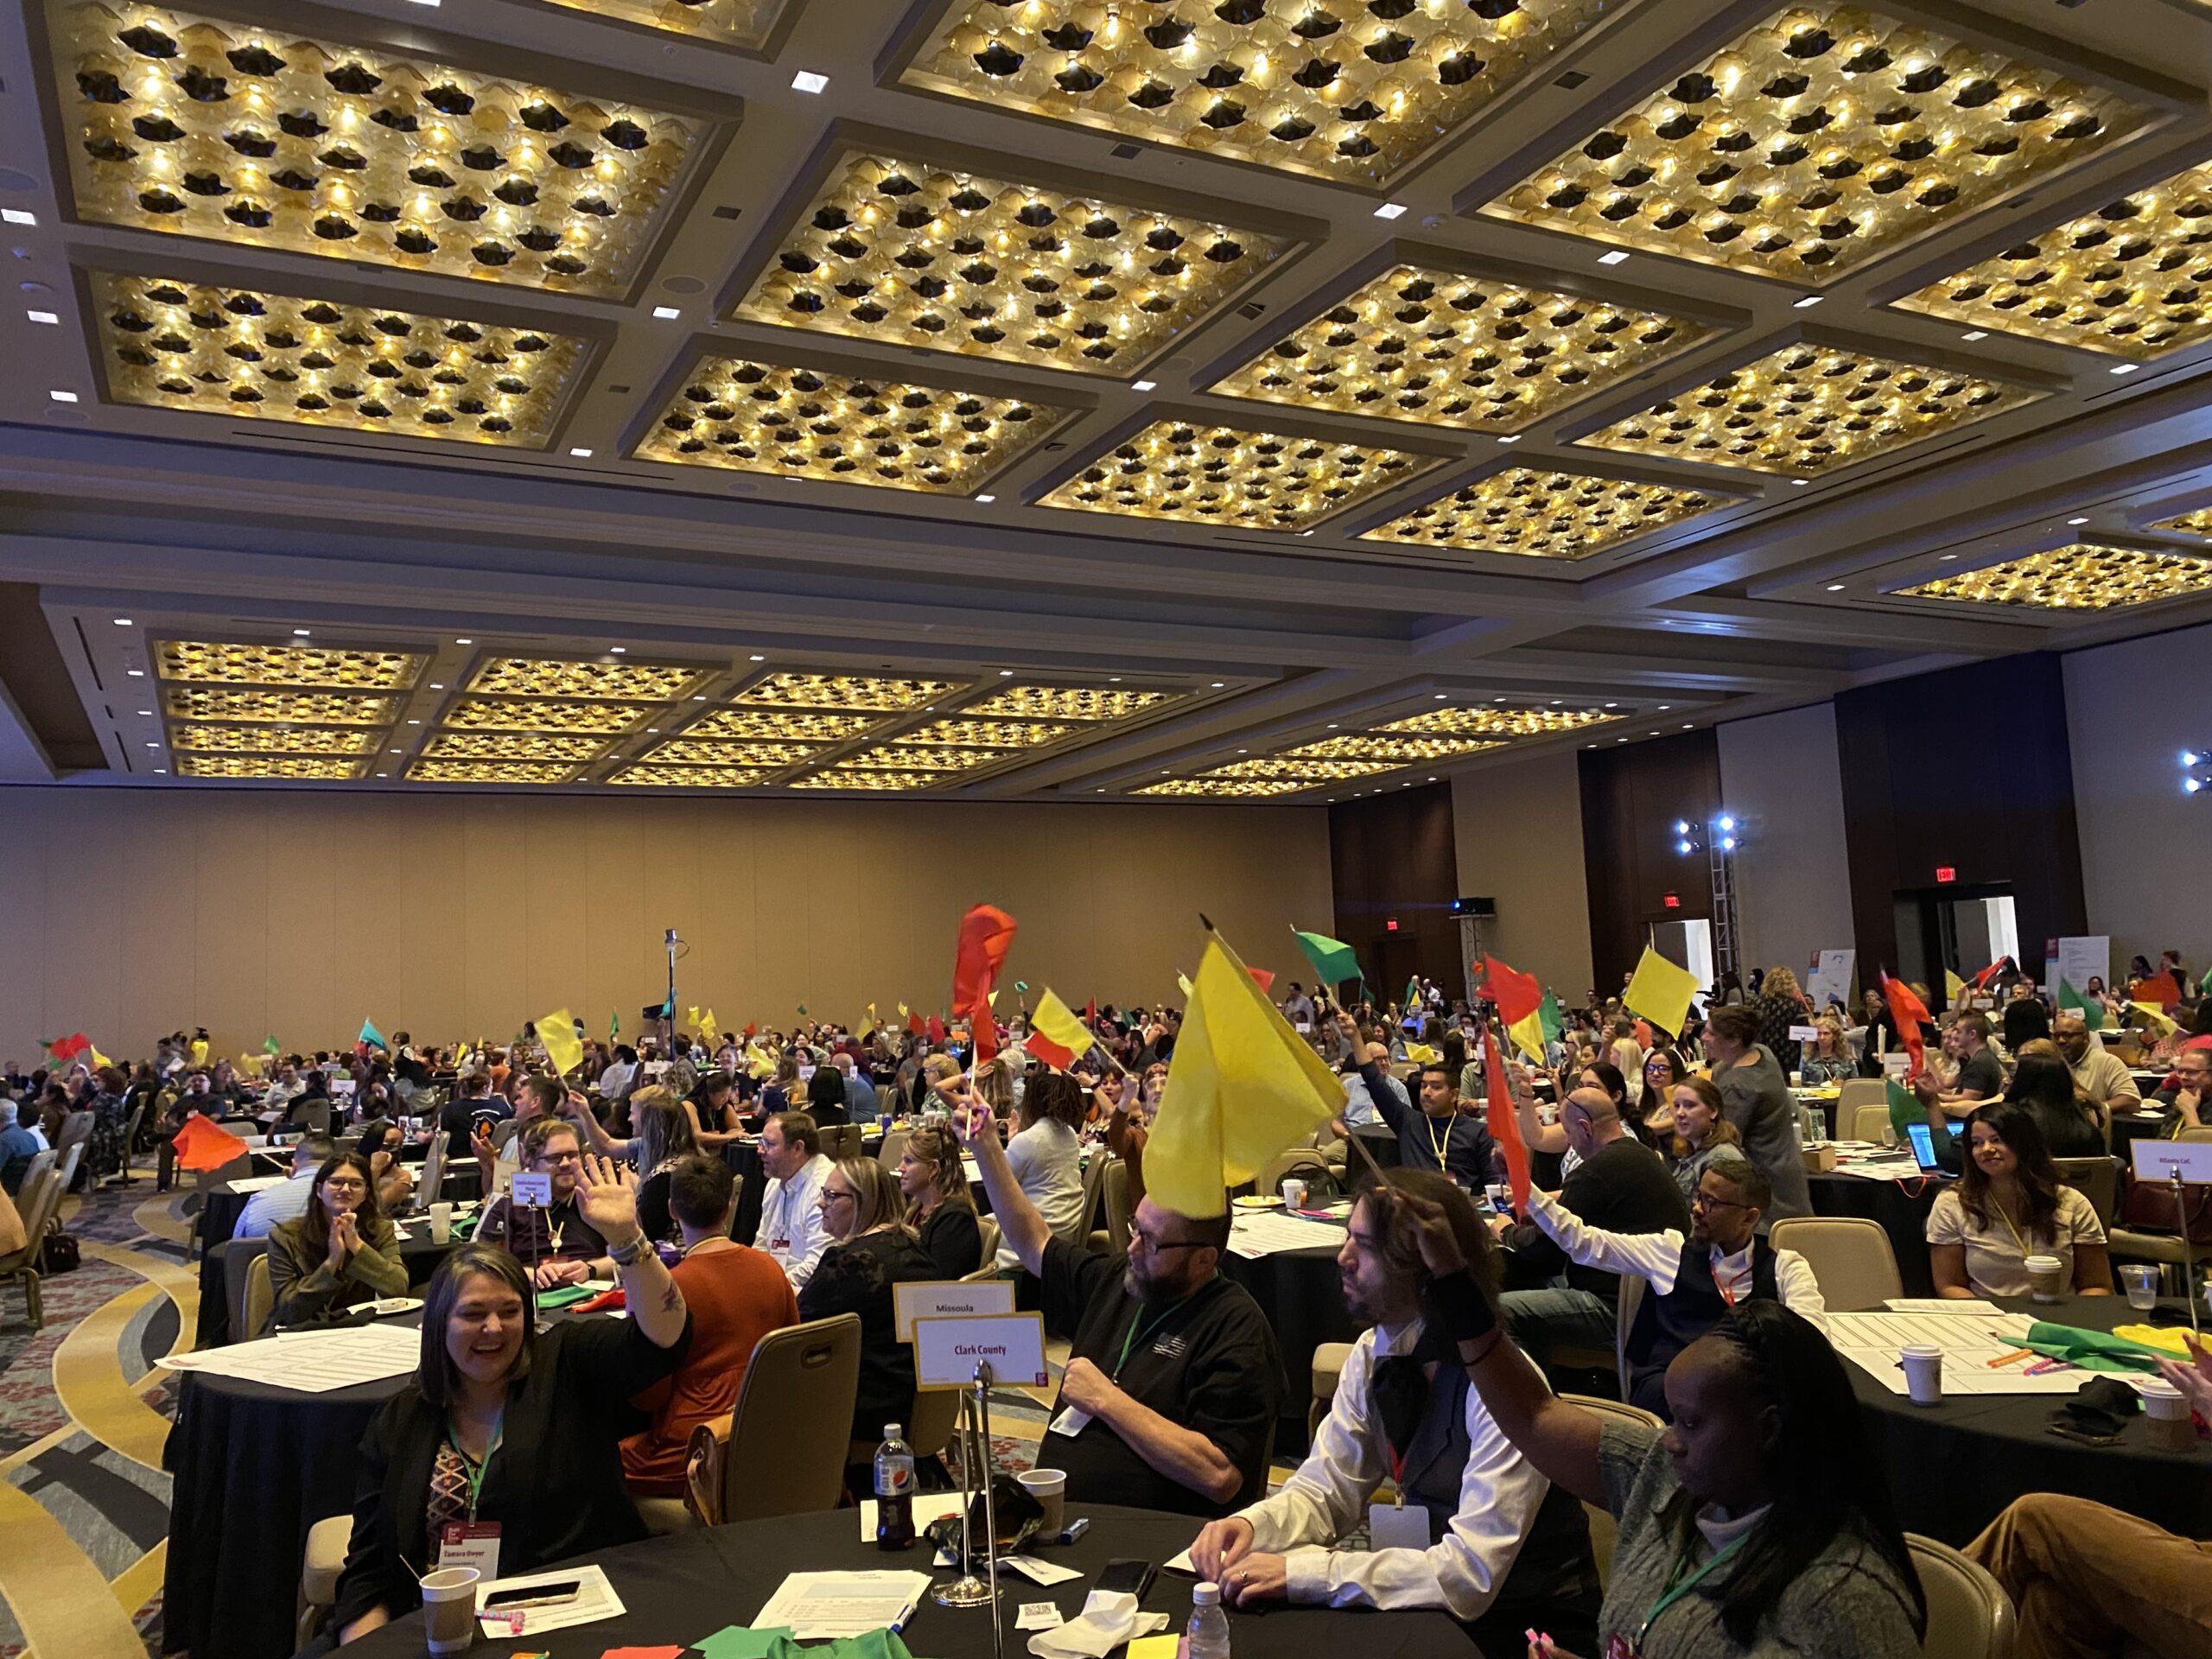 Waving flags at the learning session